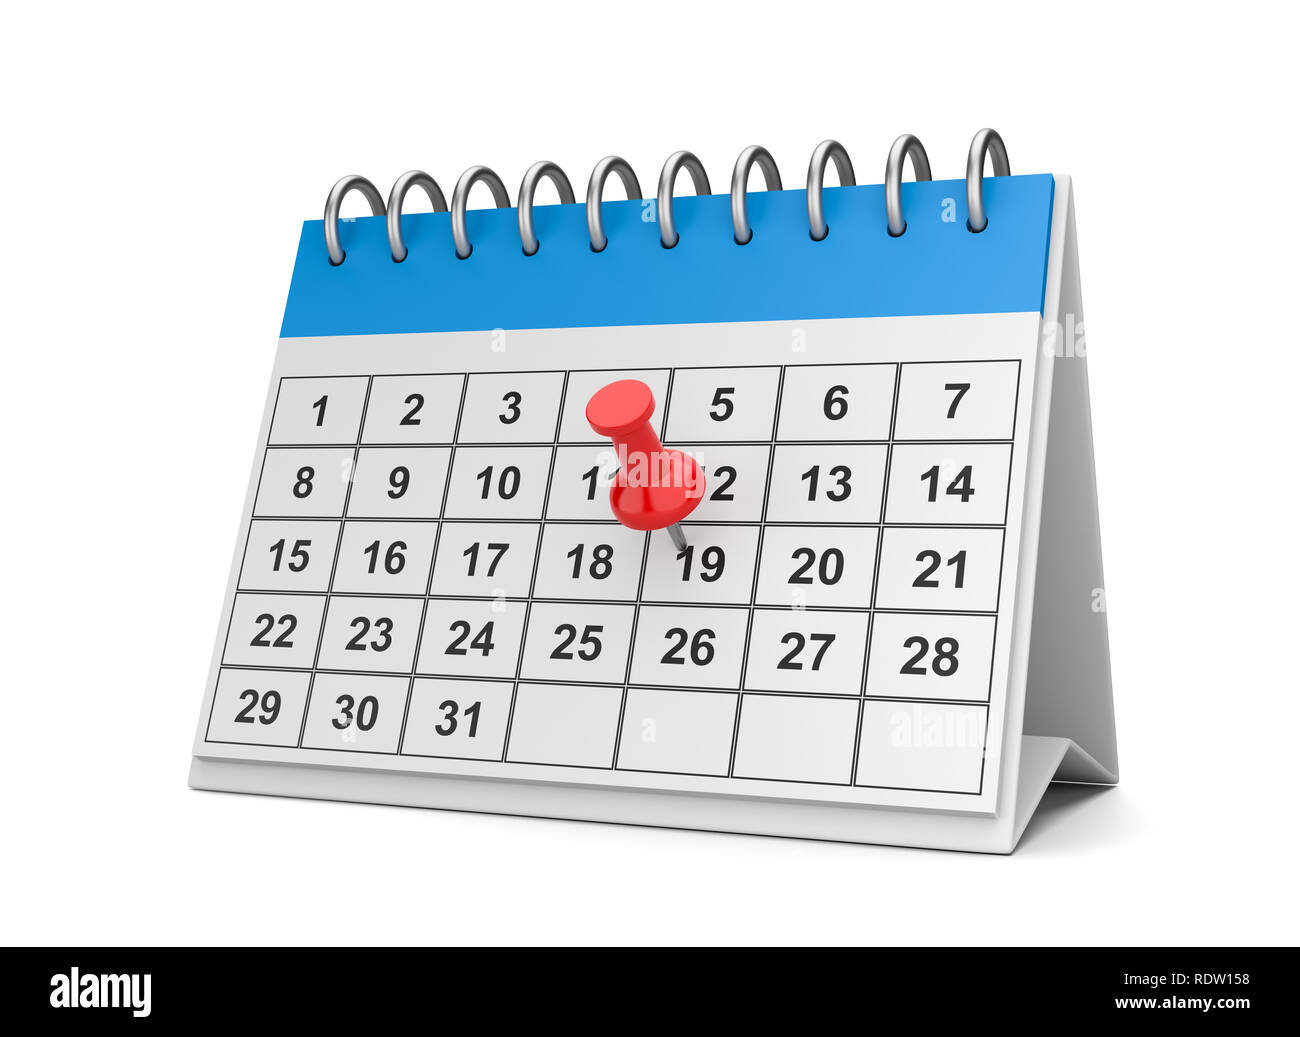 Red Pushpin on a Blue and White Desk Calendar on White Background 3D Illustration Stock Photo